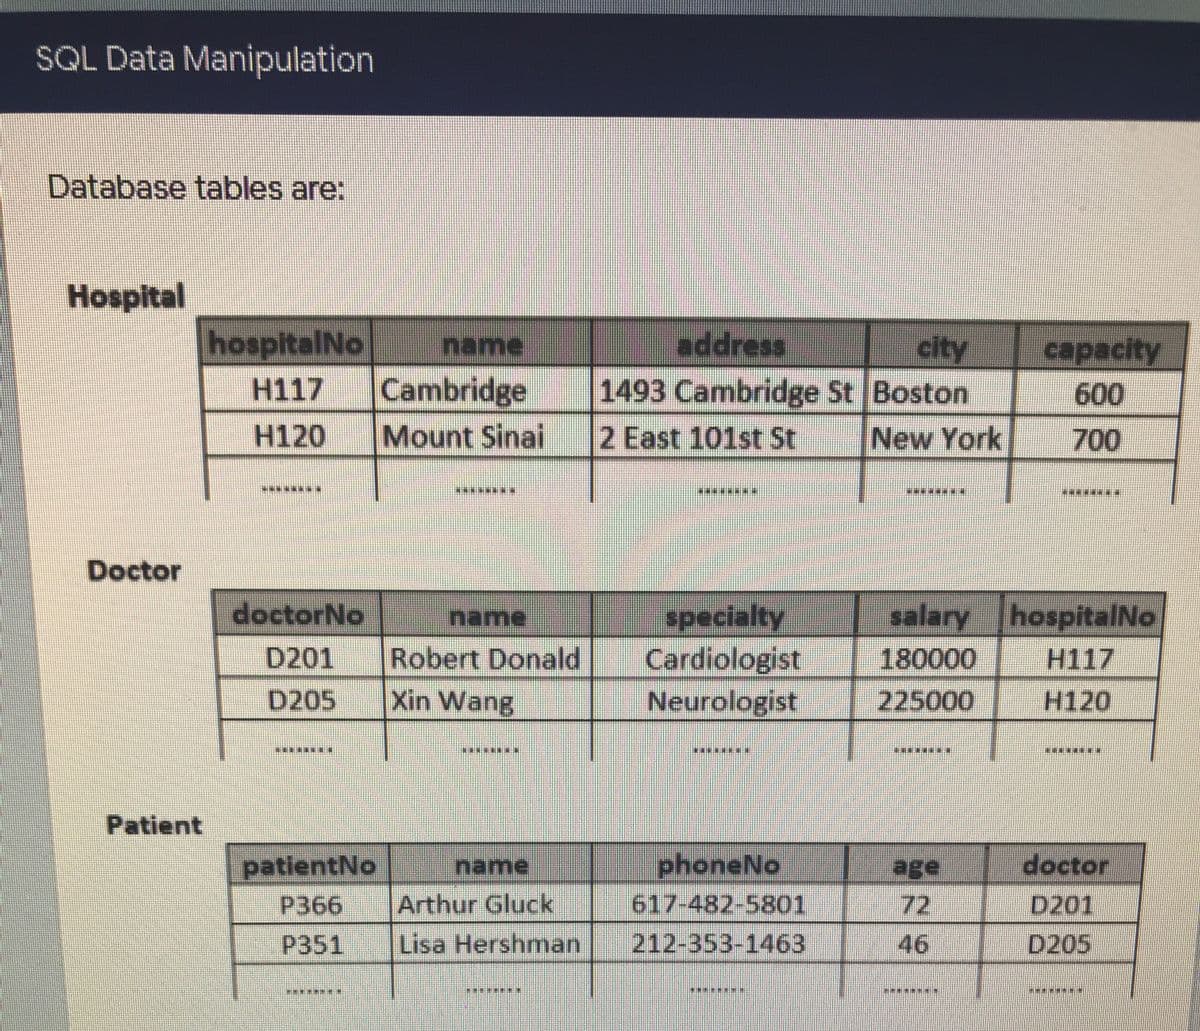 SQL Data Manipulation
Database tables are:
Hospital
hospitalNo
name
city
1493 Cambridge St Boston
capacity
Cambridge
Mount Sinai 2 East 101st St
H117
600
H120
New York
700
********
*******
*******
Doctor
doctorNo
salary hospitalNo
specialty
Cardiologist
Neurologist
name
Robert Donald
Xin Wang
D201
180000
H117
D205
225000
H120
Patient
| age
phoneNo
617-482-5801
212-353-1463
patientNo
name
doctor
P366
Arthur Gluck
72
D201
P351
Lisa Hershman
46
D205
****
